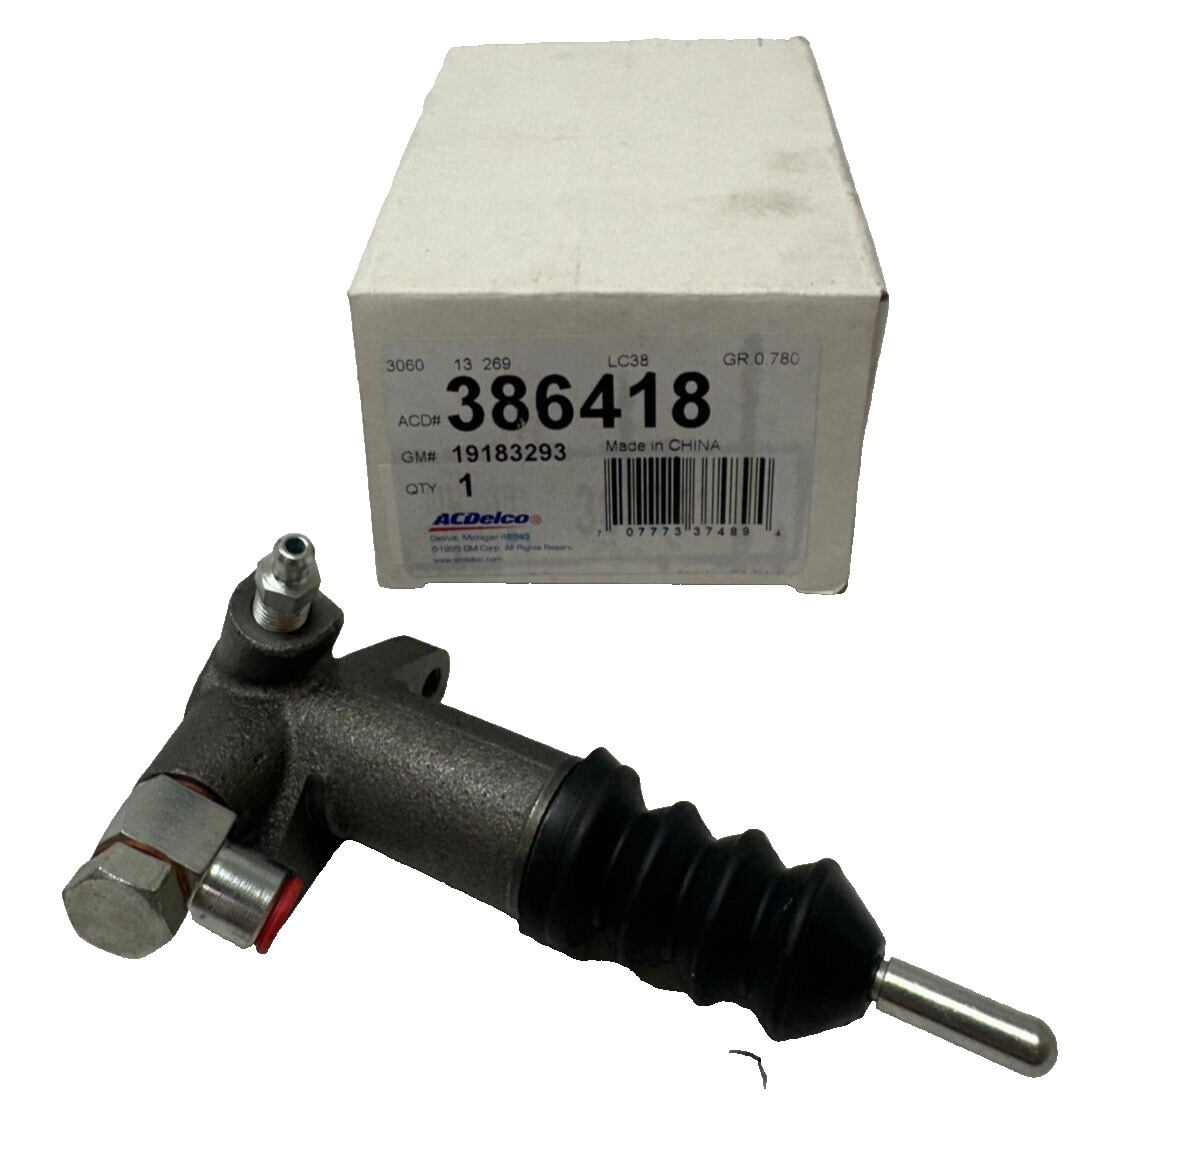 ACDelco Clutch Slave Cylinder For Hyundai Accent Scoupe 1.5L 1.6L